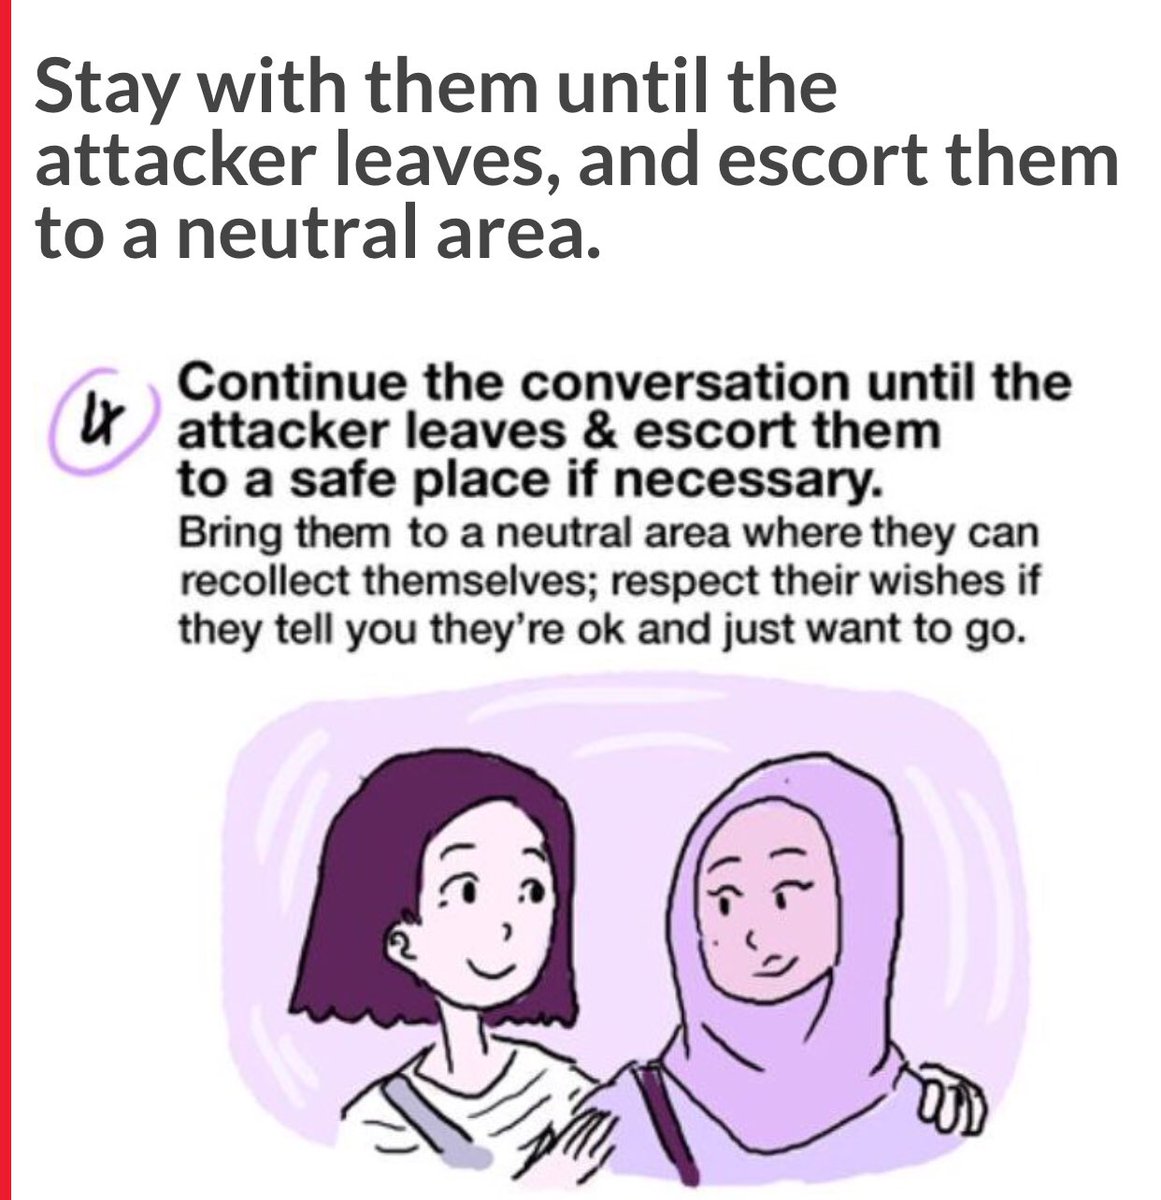 @tiffstevenson Marie-Shirine Yener, a 22-year-old Parisian illustrator, created a guide to give people advice on how they can help Muslims or anyone being harassed.